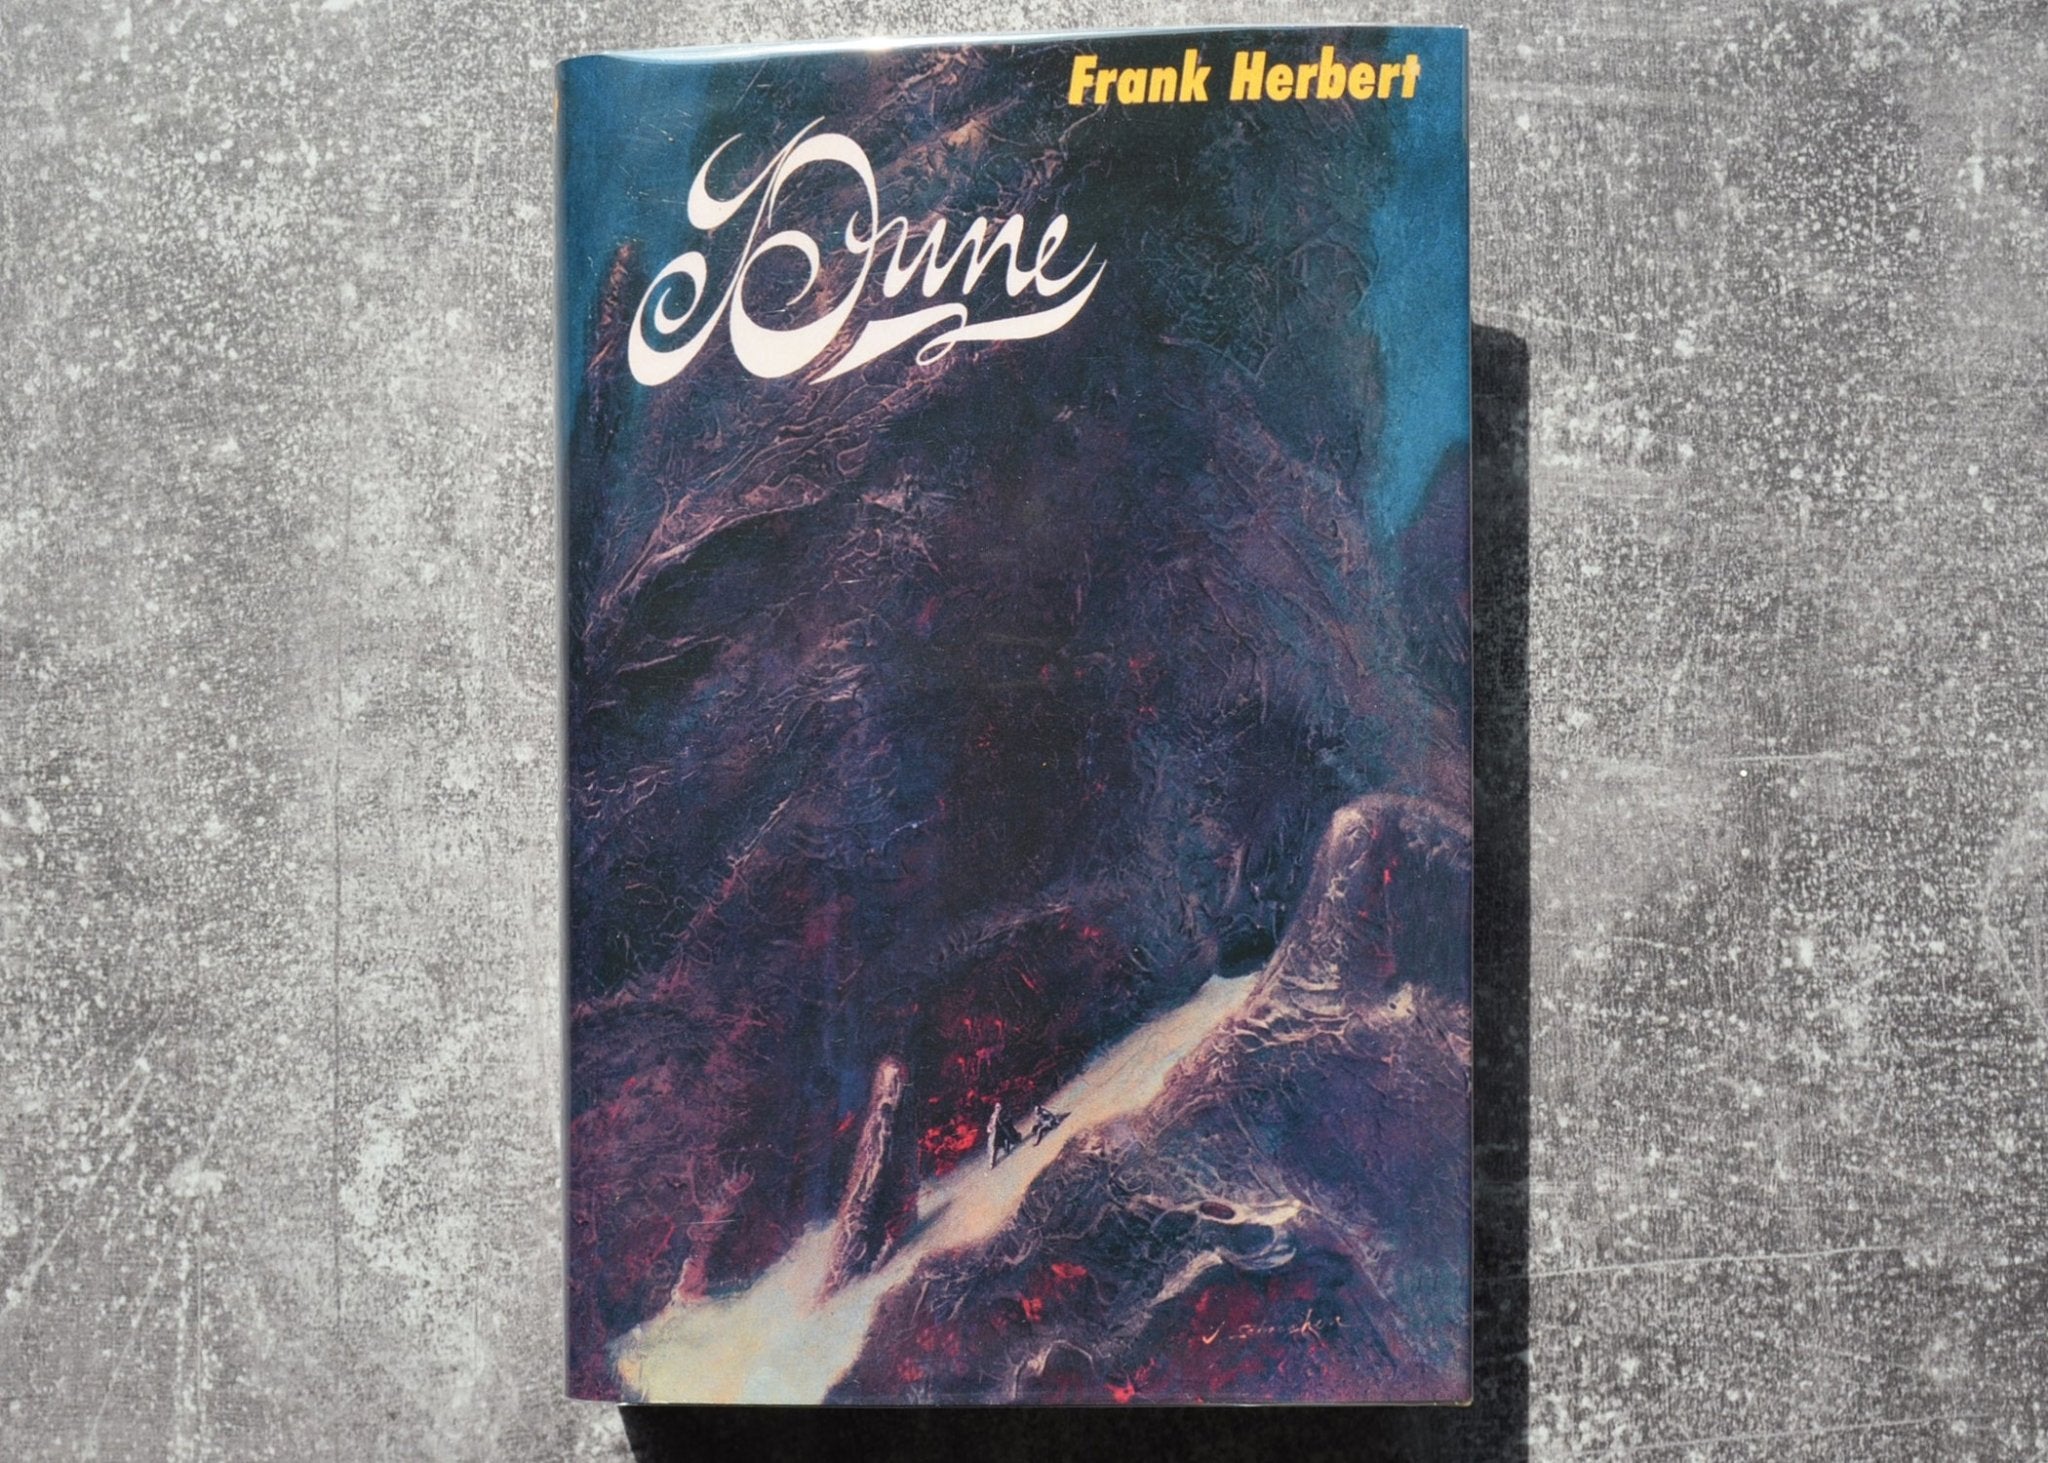 New Edition of Dune by Frank Herbert in a Facsimile First Edition Dust Jacket - Brookfield Books